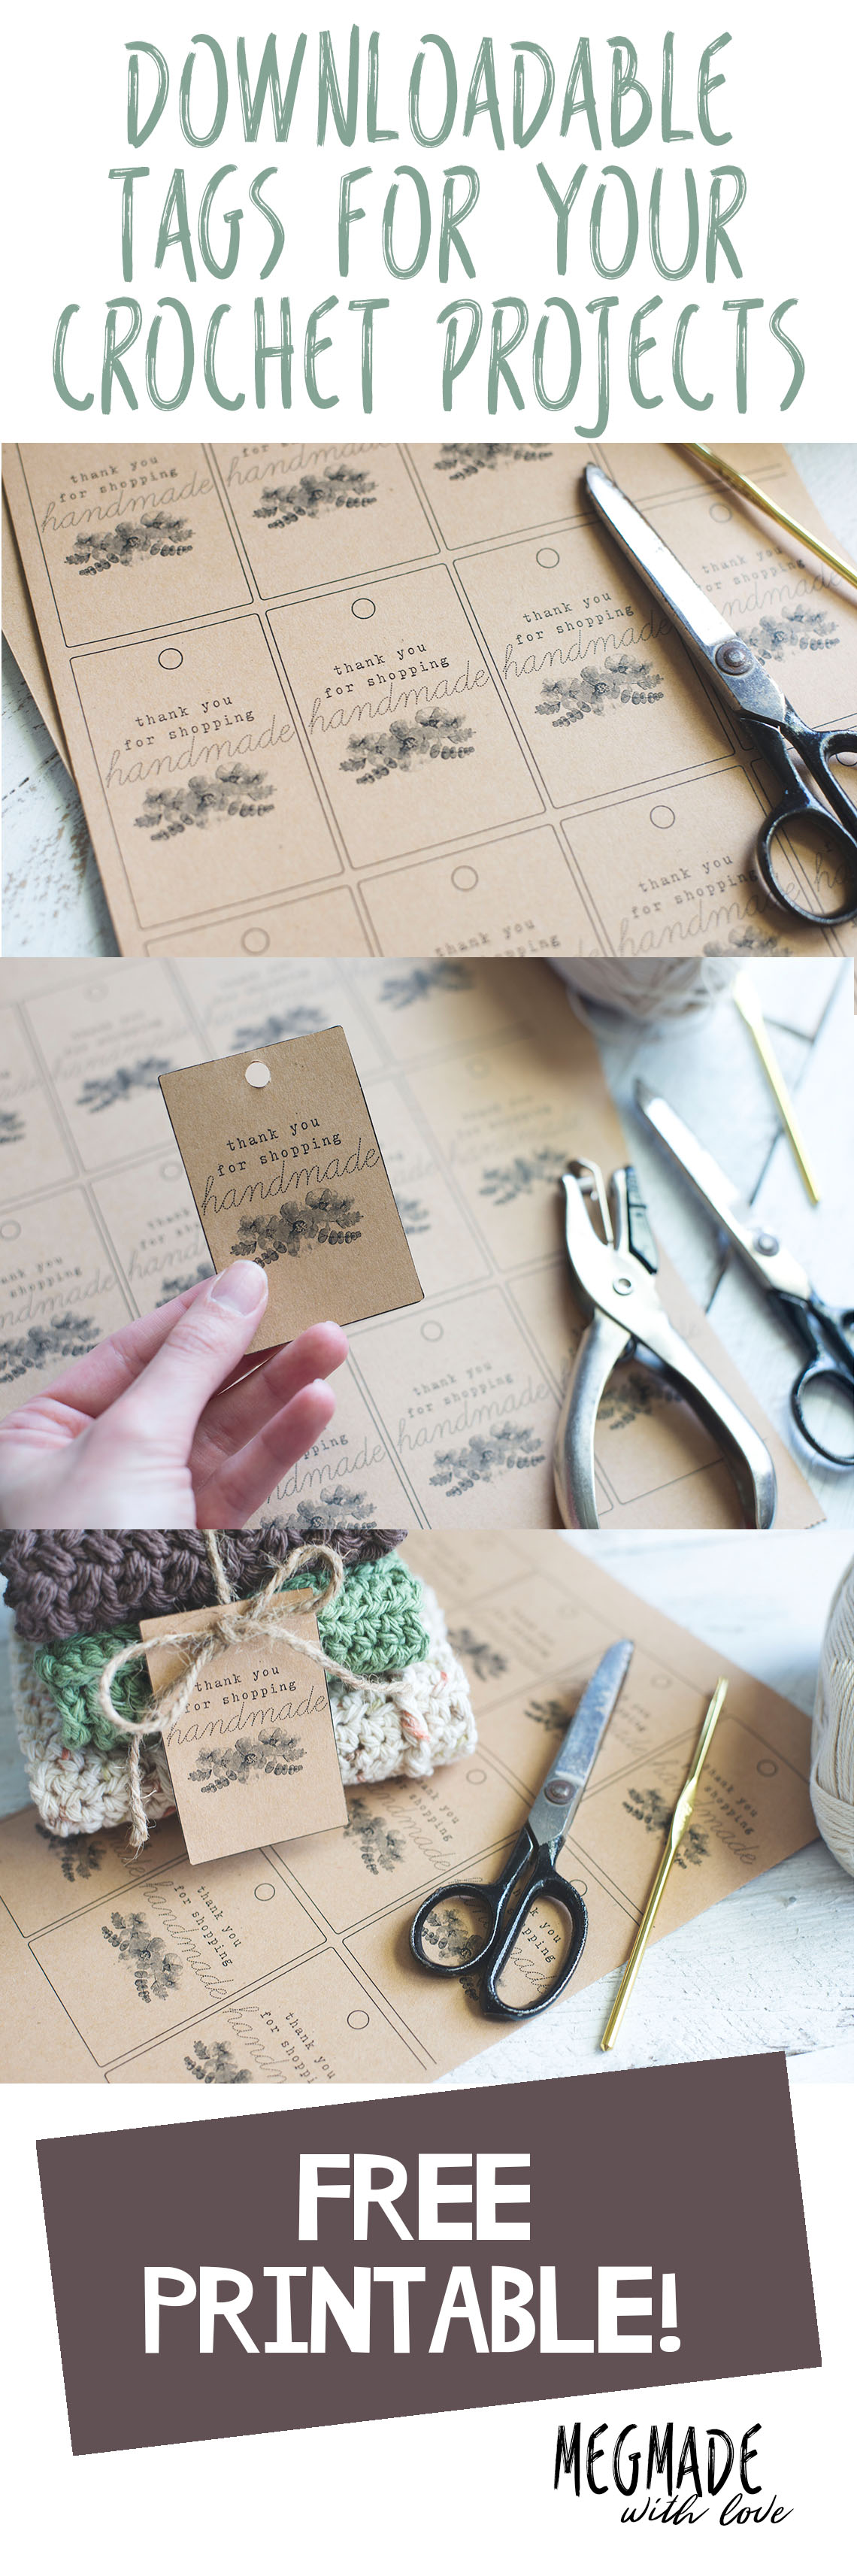 Handmade with Love Printable Hang Tags - Resources for a Handmade Lifestyle  - Made by Hand